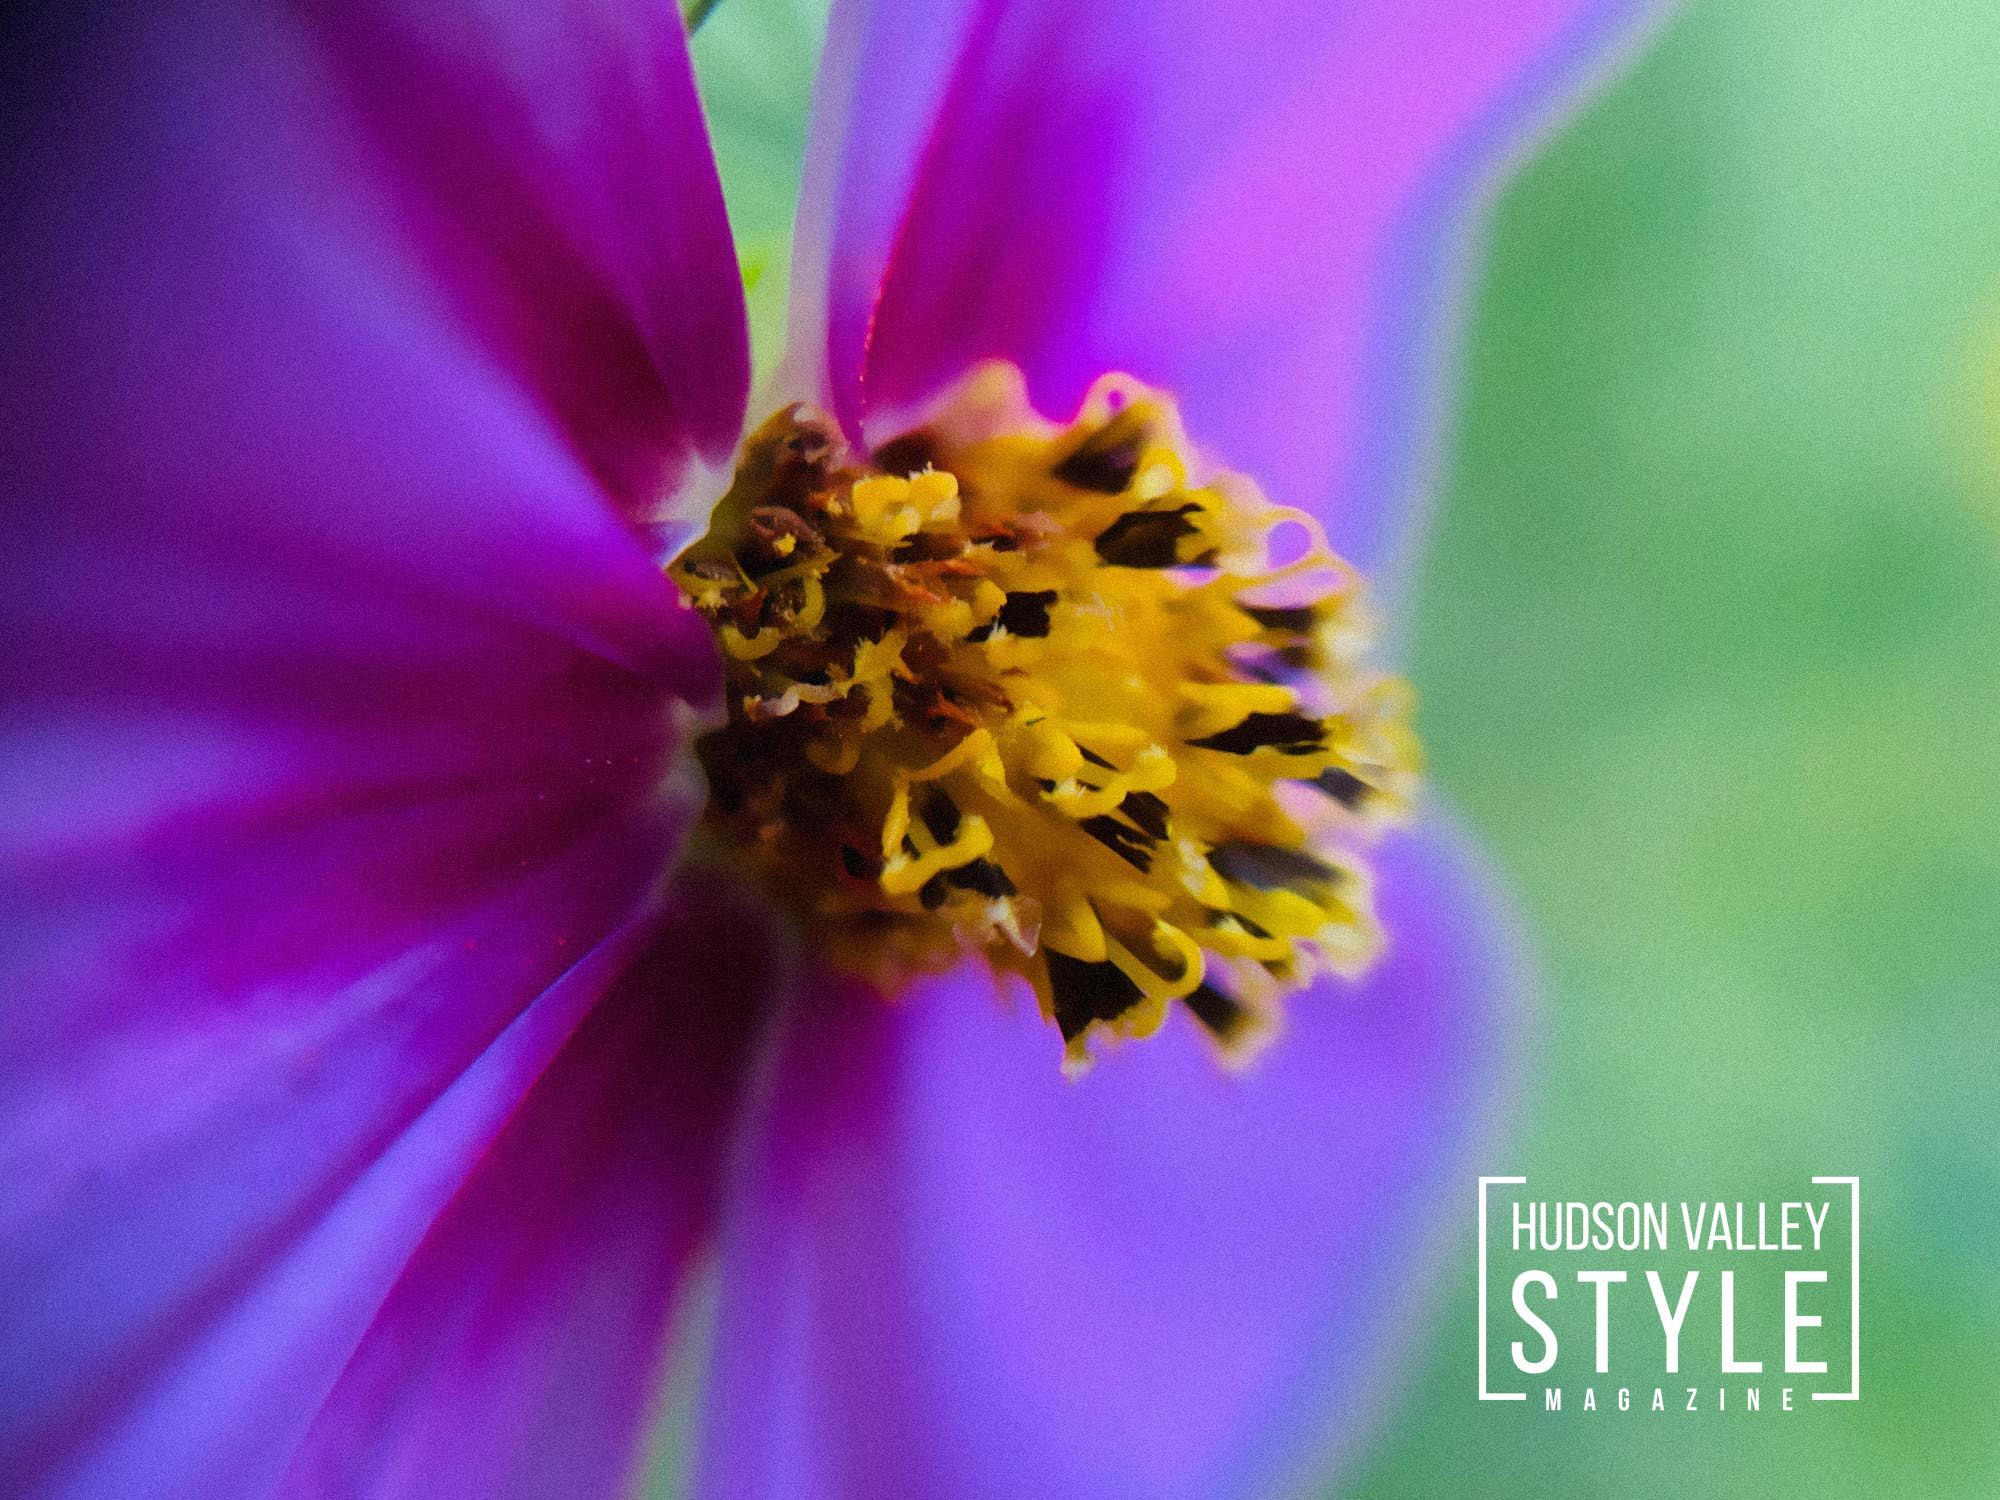 Dancing with Details: The Fine Art of Hudson Valley's Summer Symphony – Wild Flower Fields Nature Photoshoot by Maxwell Alexander